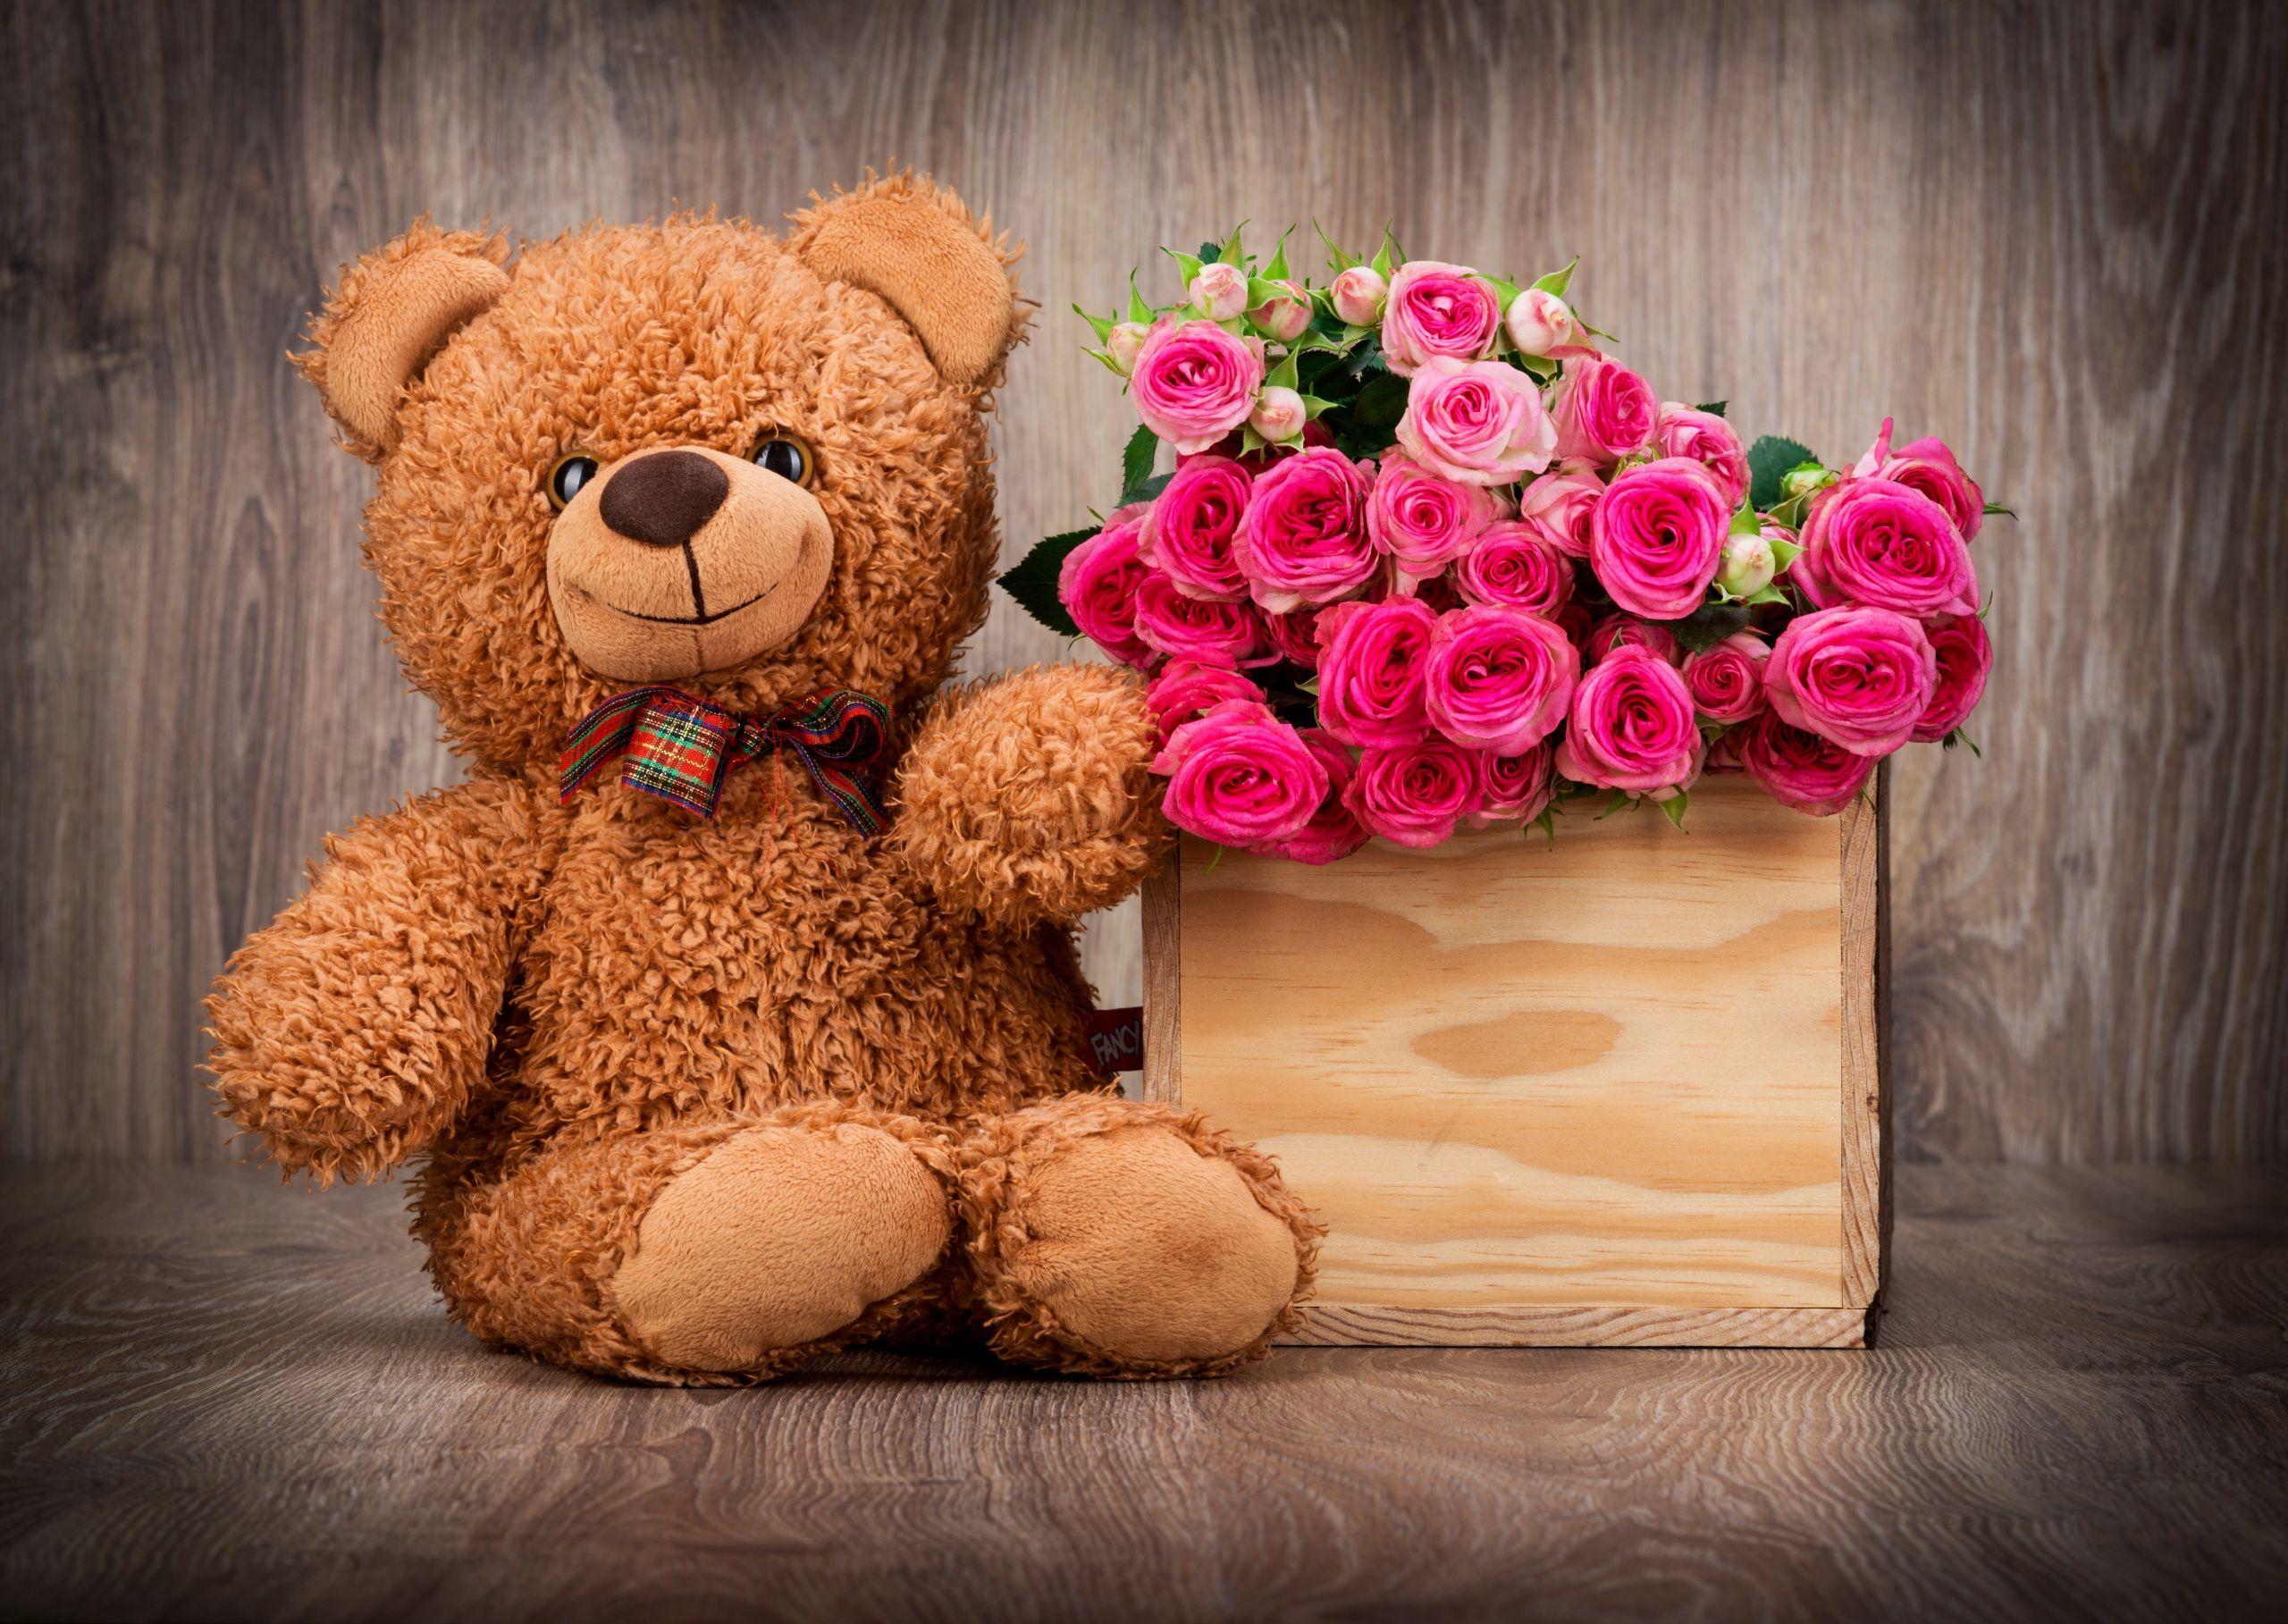 Cute Teddy Bear Wallpaper with Pink Roses in Box. HD Wallpaper